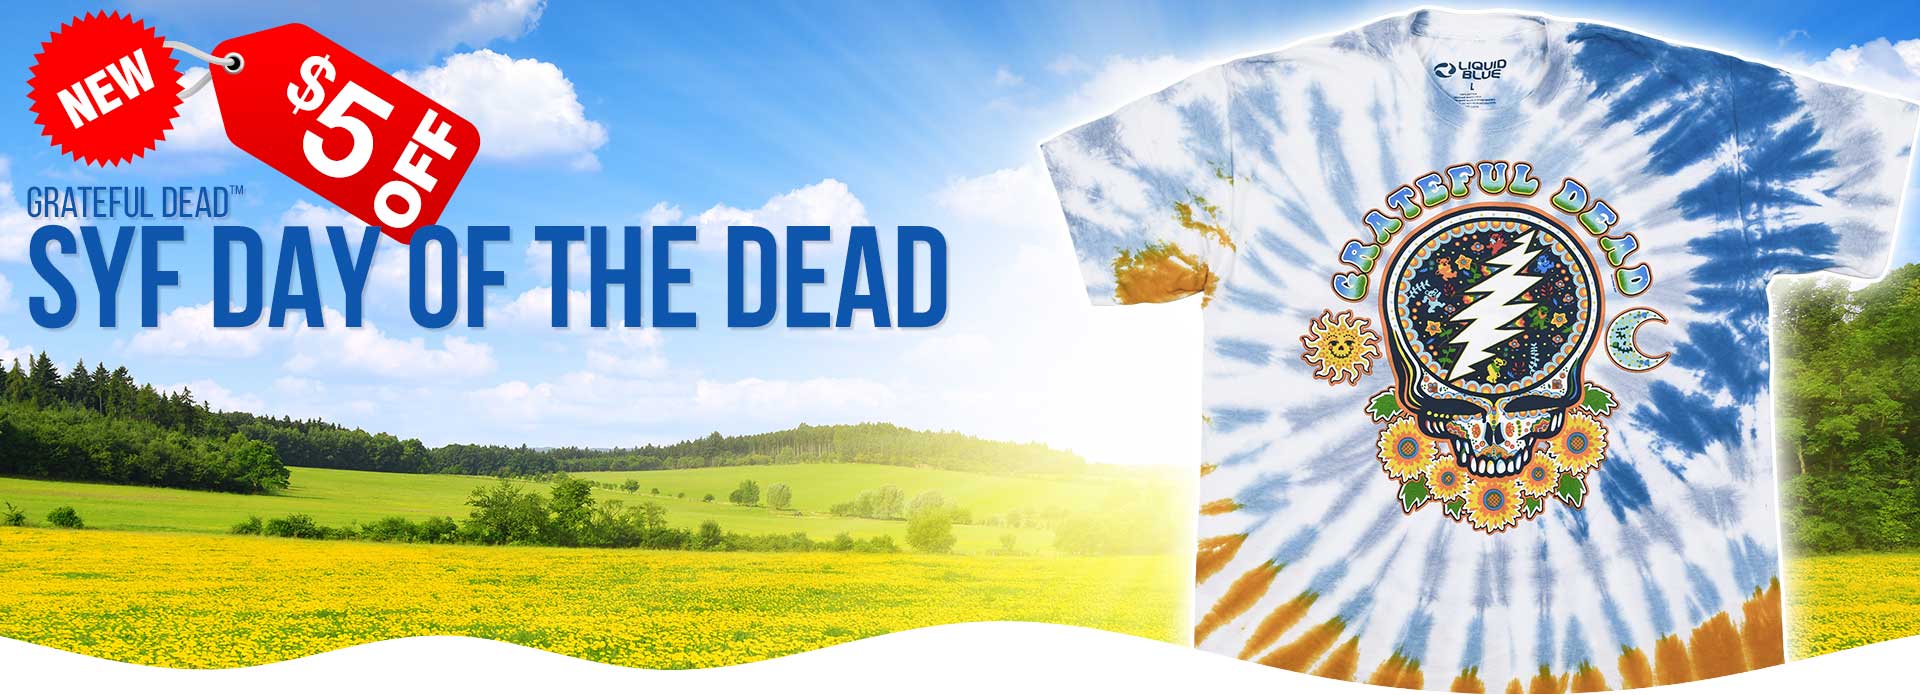 $5 OFF NEW Grateful Dead SYF Day of The Dead Tie-Dye T-Shirt Tee